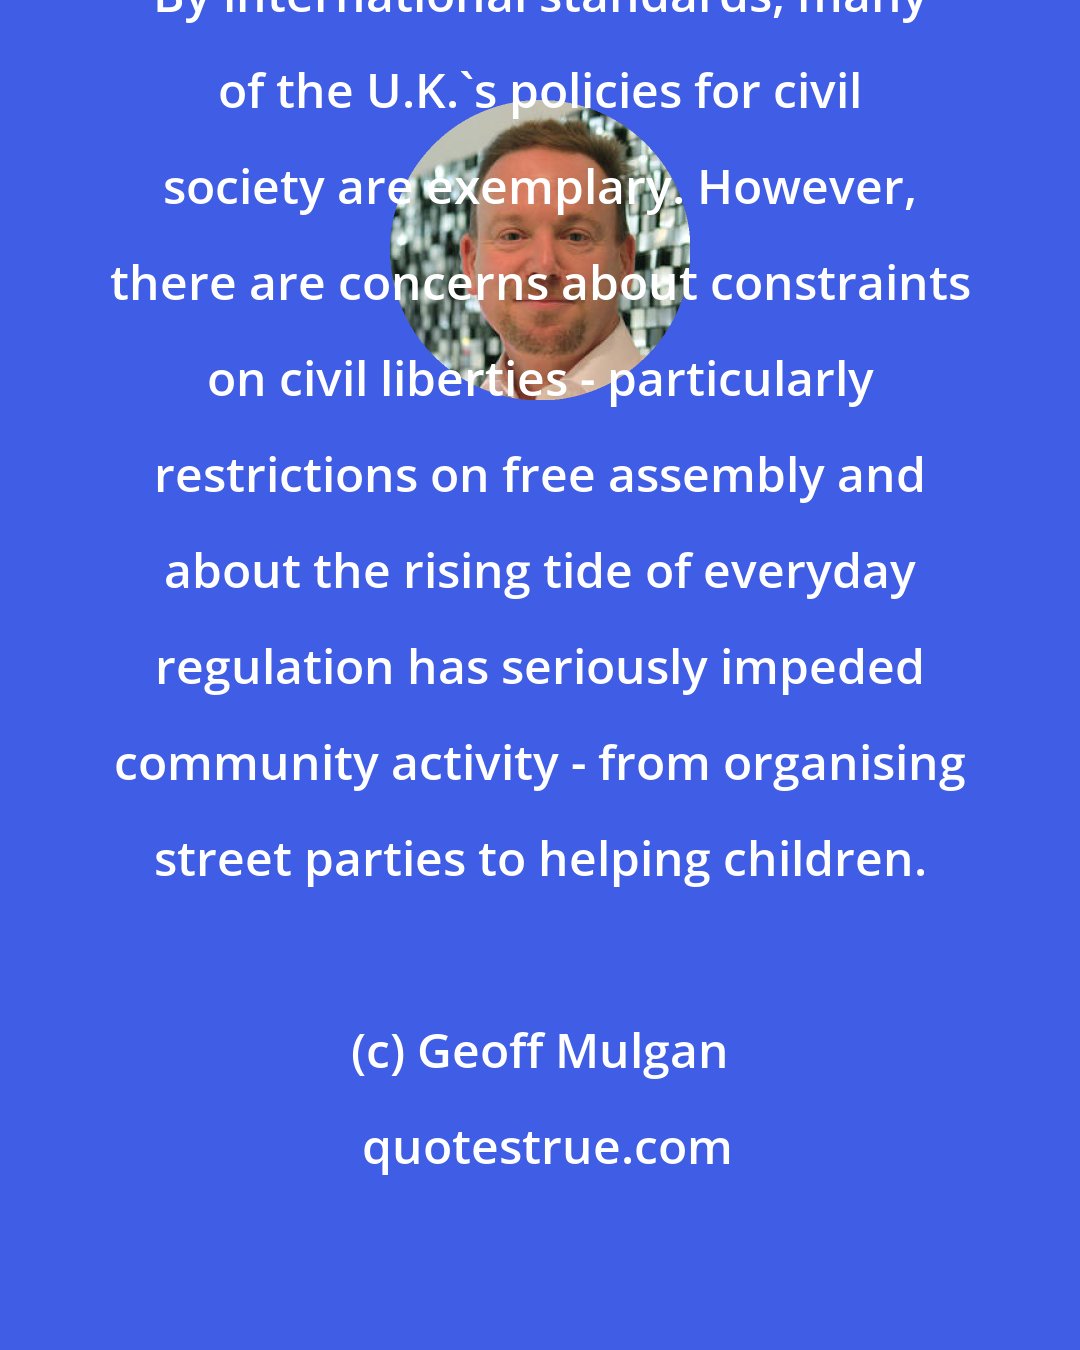 Geoff Mulgan: By international standards, many of the U.K.'s policies for civil society are exemplary. However, there are concerns about constraints on civil liberties - particularly restrictions on free assembly and about the rising tide of everyday regulation has seriously impeded community activity - from organising street parties to helping children.